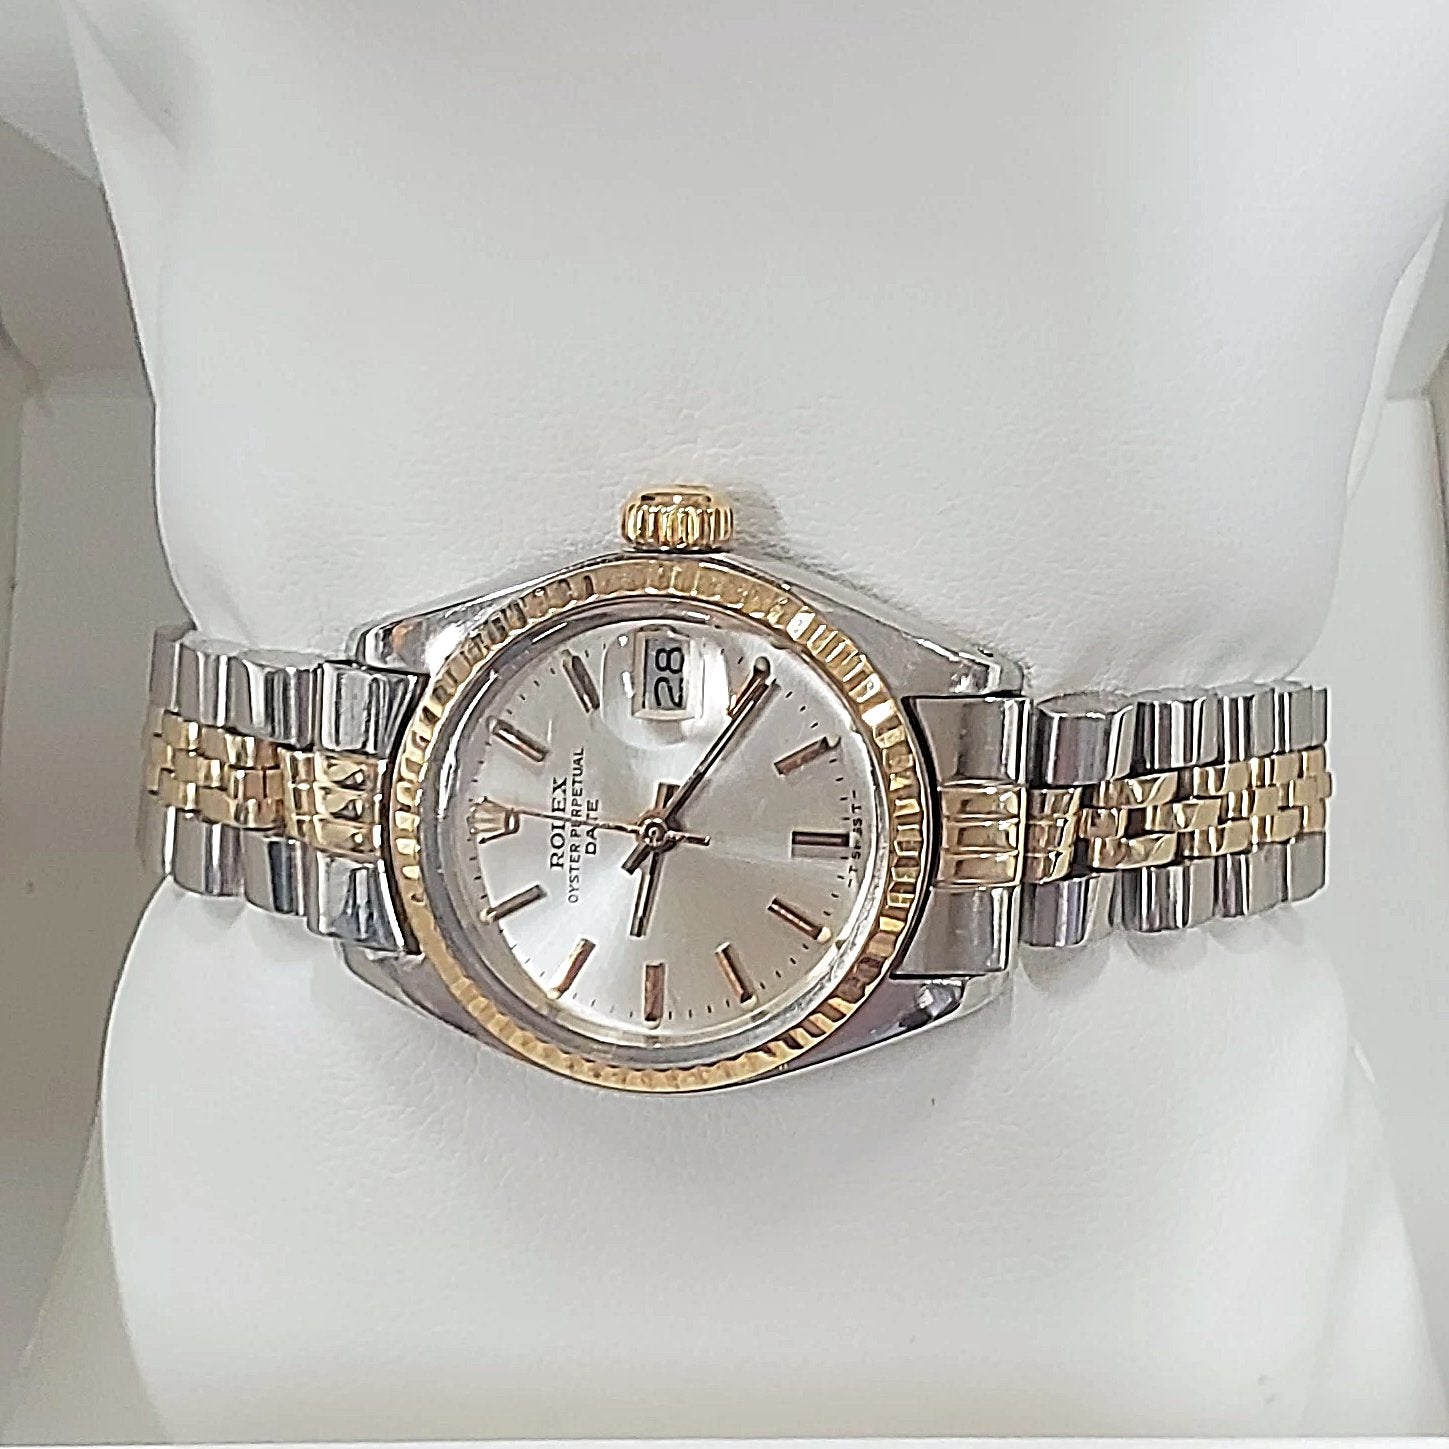 Ladies Rolex 26mm DateJust Two Tone 14K Yellow Gold / Stainless Steel Watch with Silver Dial and Fluted Bezel. (Pre-Owned)